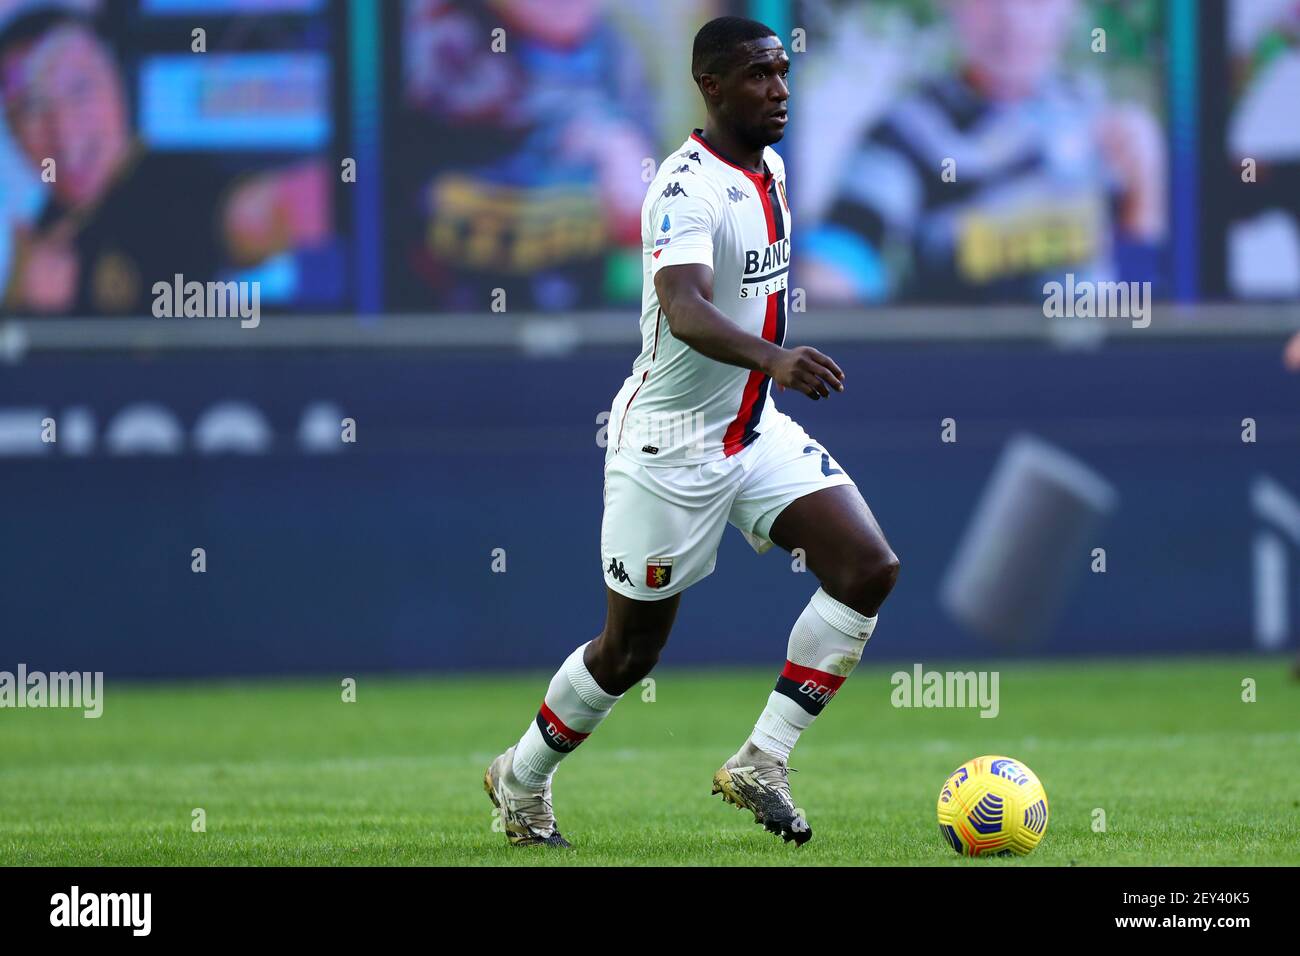 Cristian Zapata of Genoa Cfc  in action during the Serie A match between Fc Internazionale and Genoa Cfc. Fc Internazionale wins 3-0 over Genoa Cfc. Stock Photo